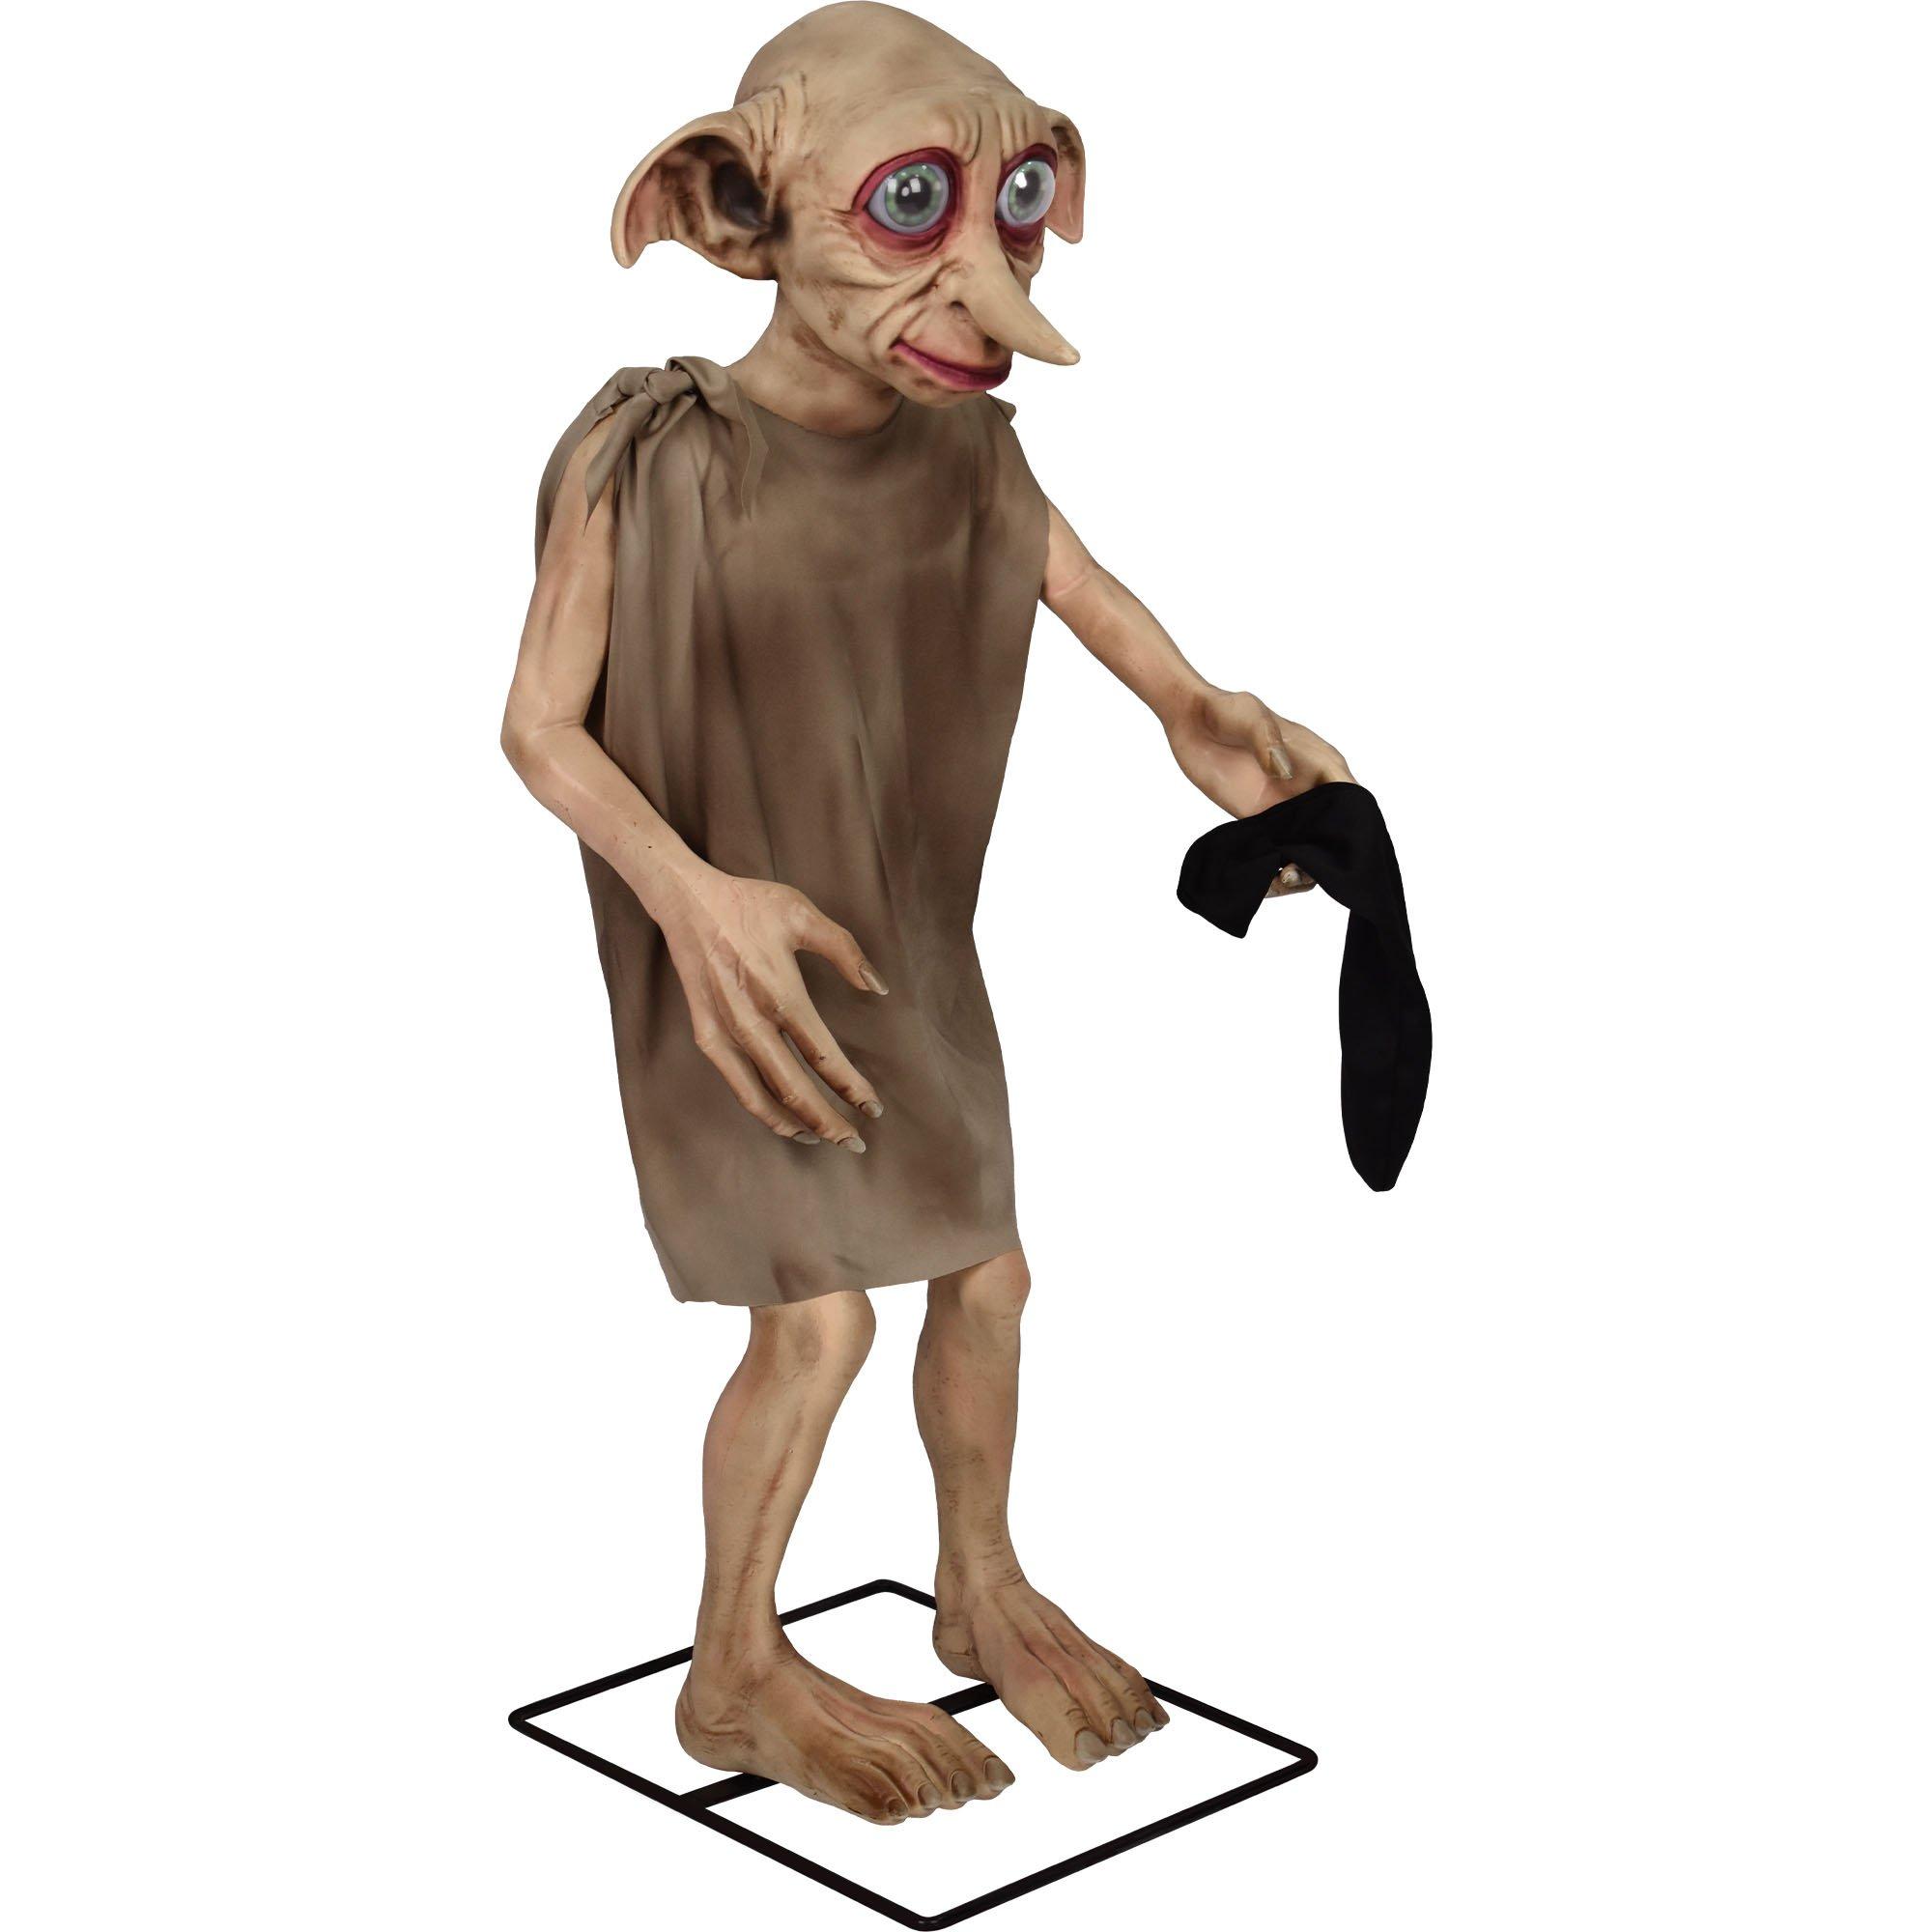 Dobby Plastic & Fabric Prop, 42in - Harry Potter